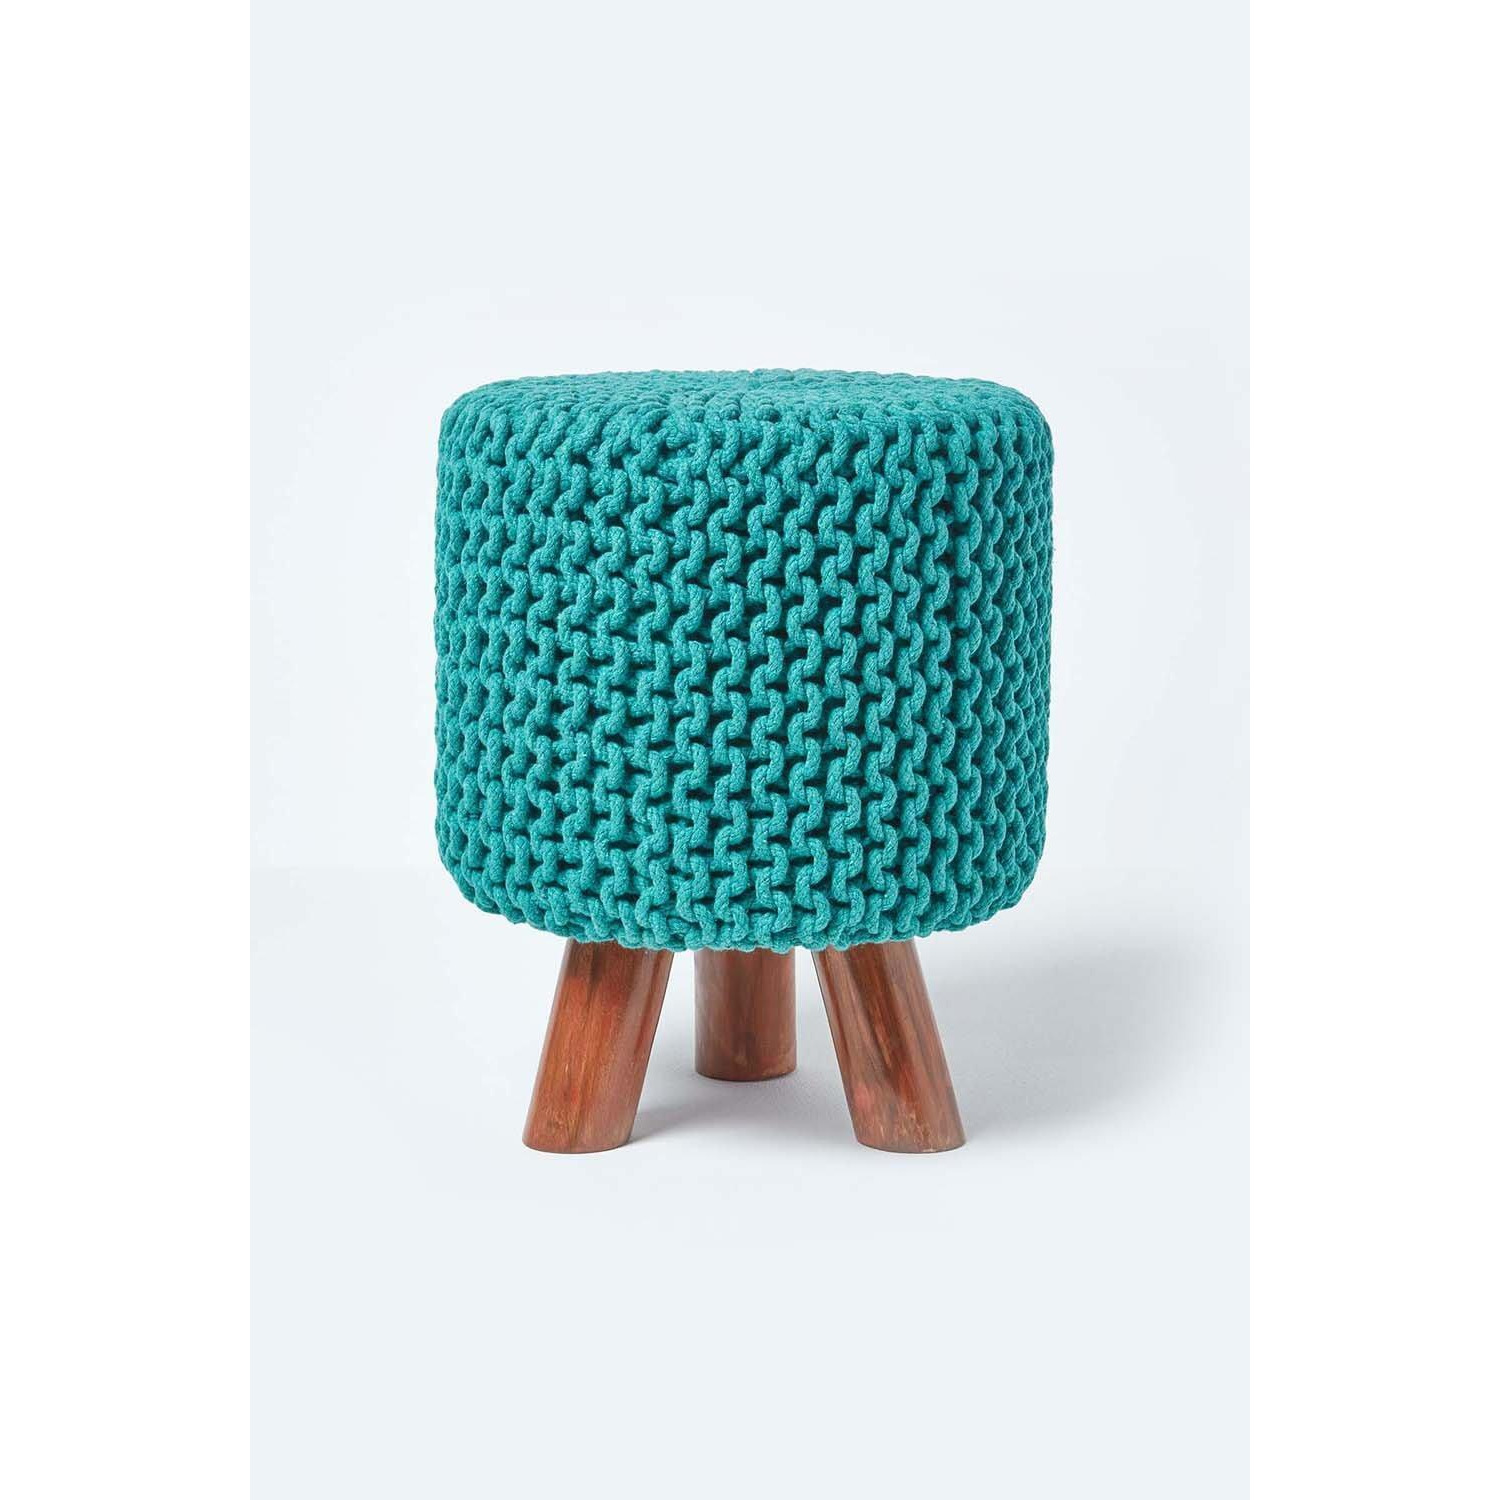 Tall Cotton Knitted Footstool on Legs - image 1